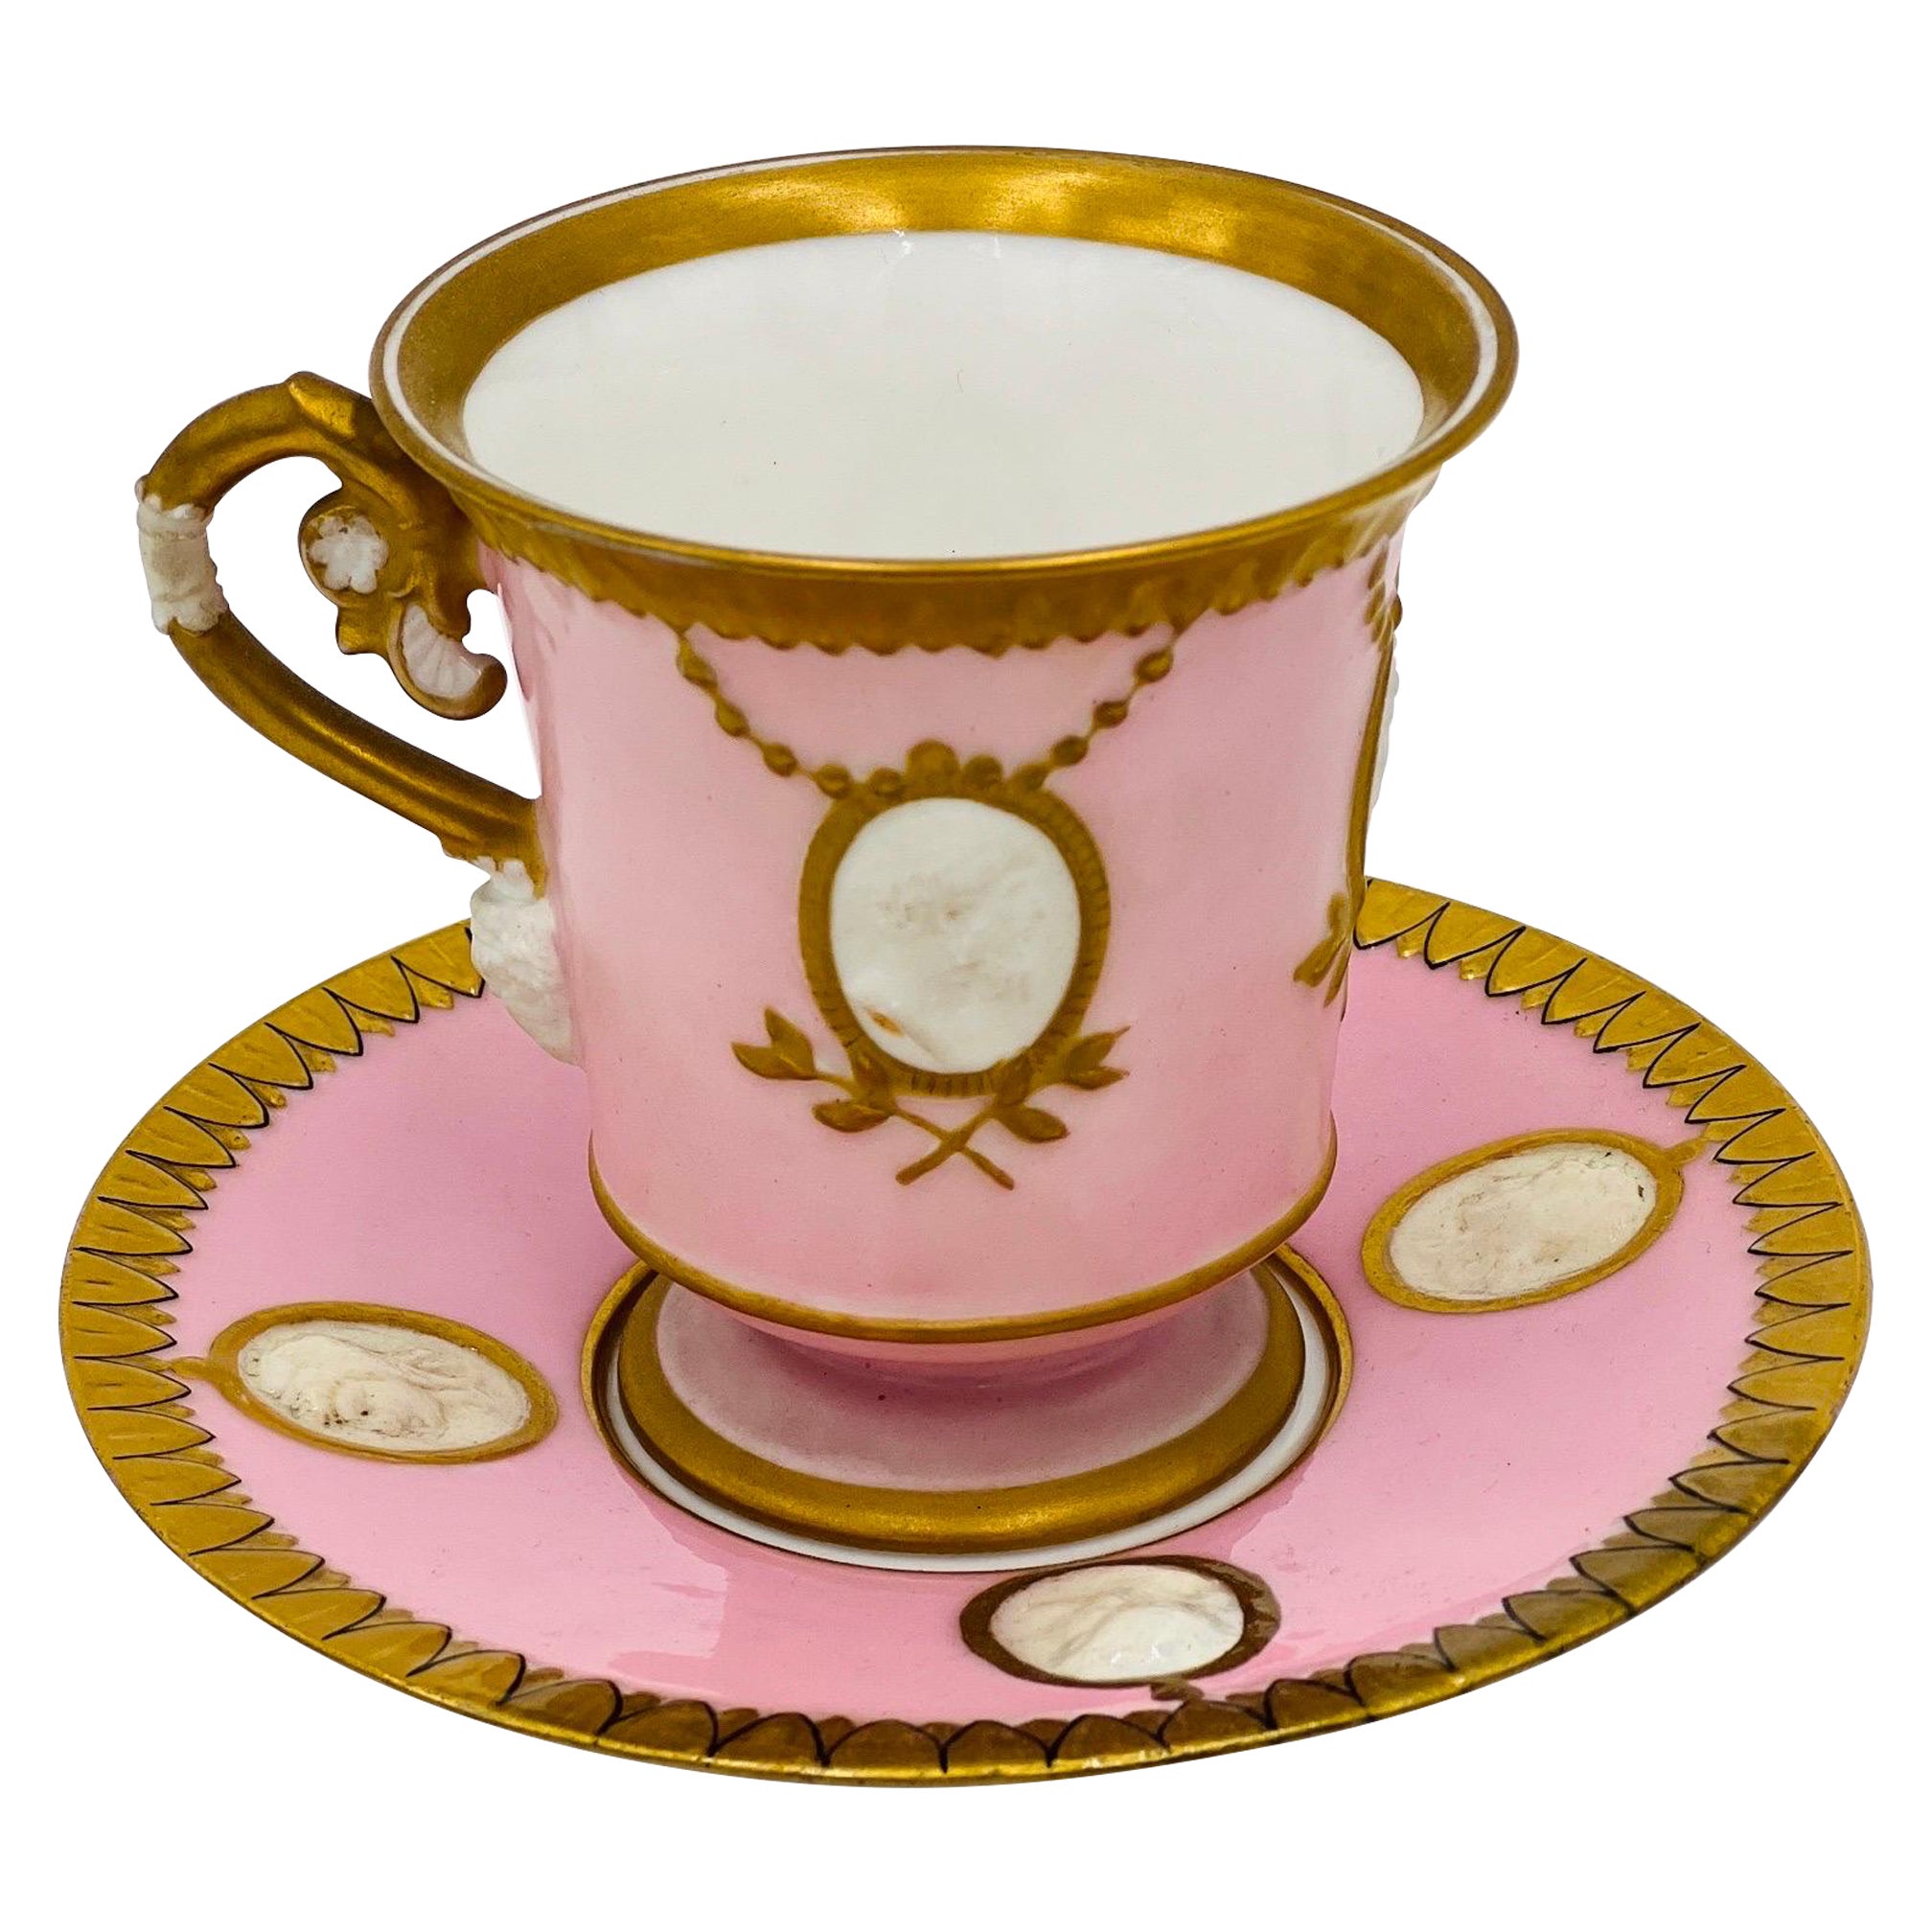 Rare Old Paris Empire Style Classical Teacup & Saucer w/ Bisque Faces & Ram Head For Sale